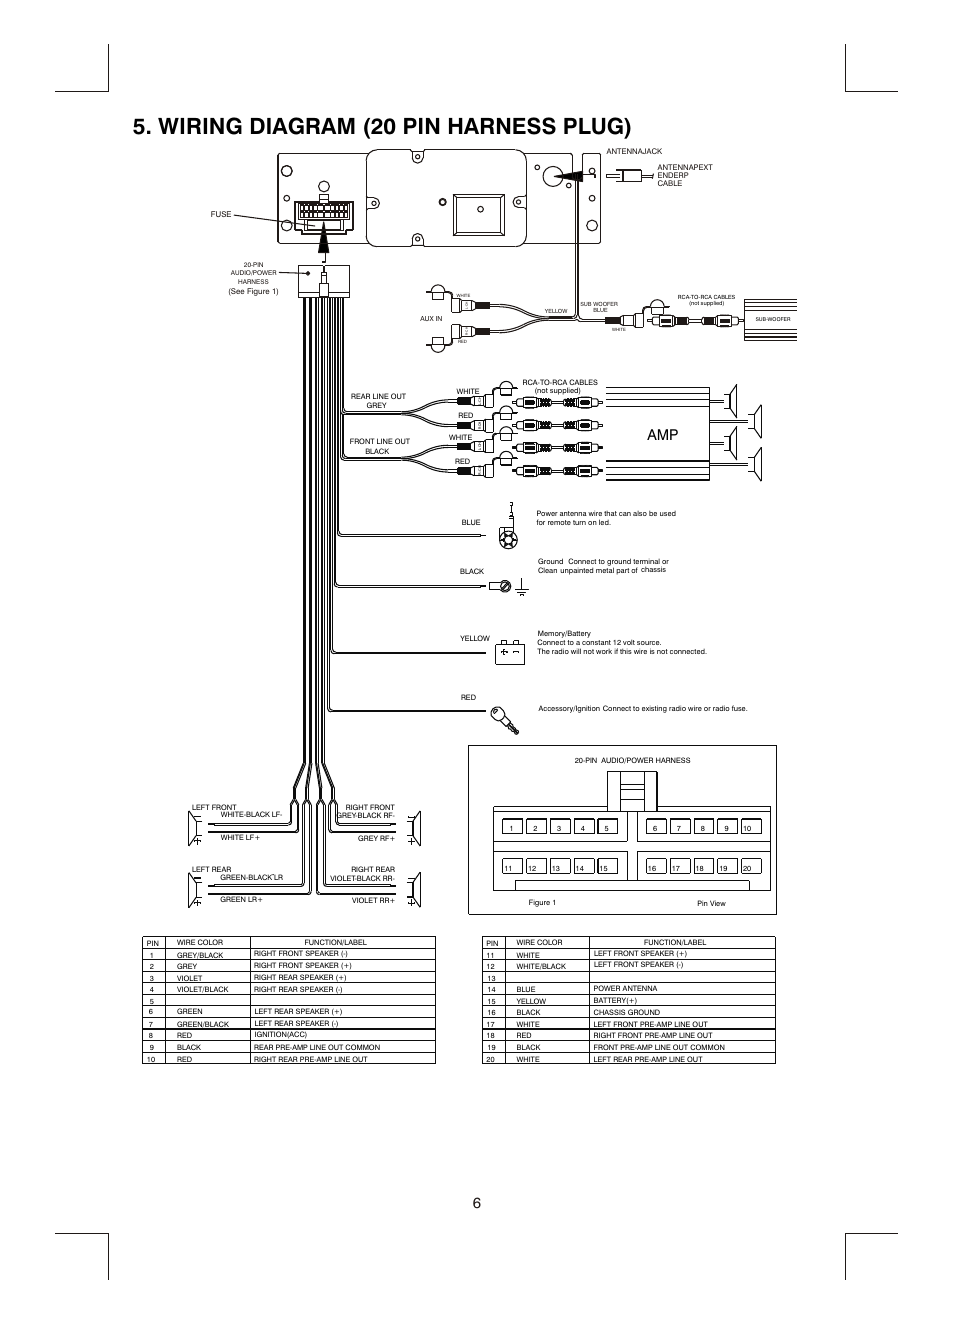 Wiring diagram (20 pin harness plug) | Boss Audio Systems MR1400W User  Manual | Page 7 / 14